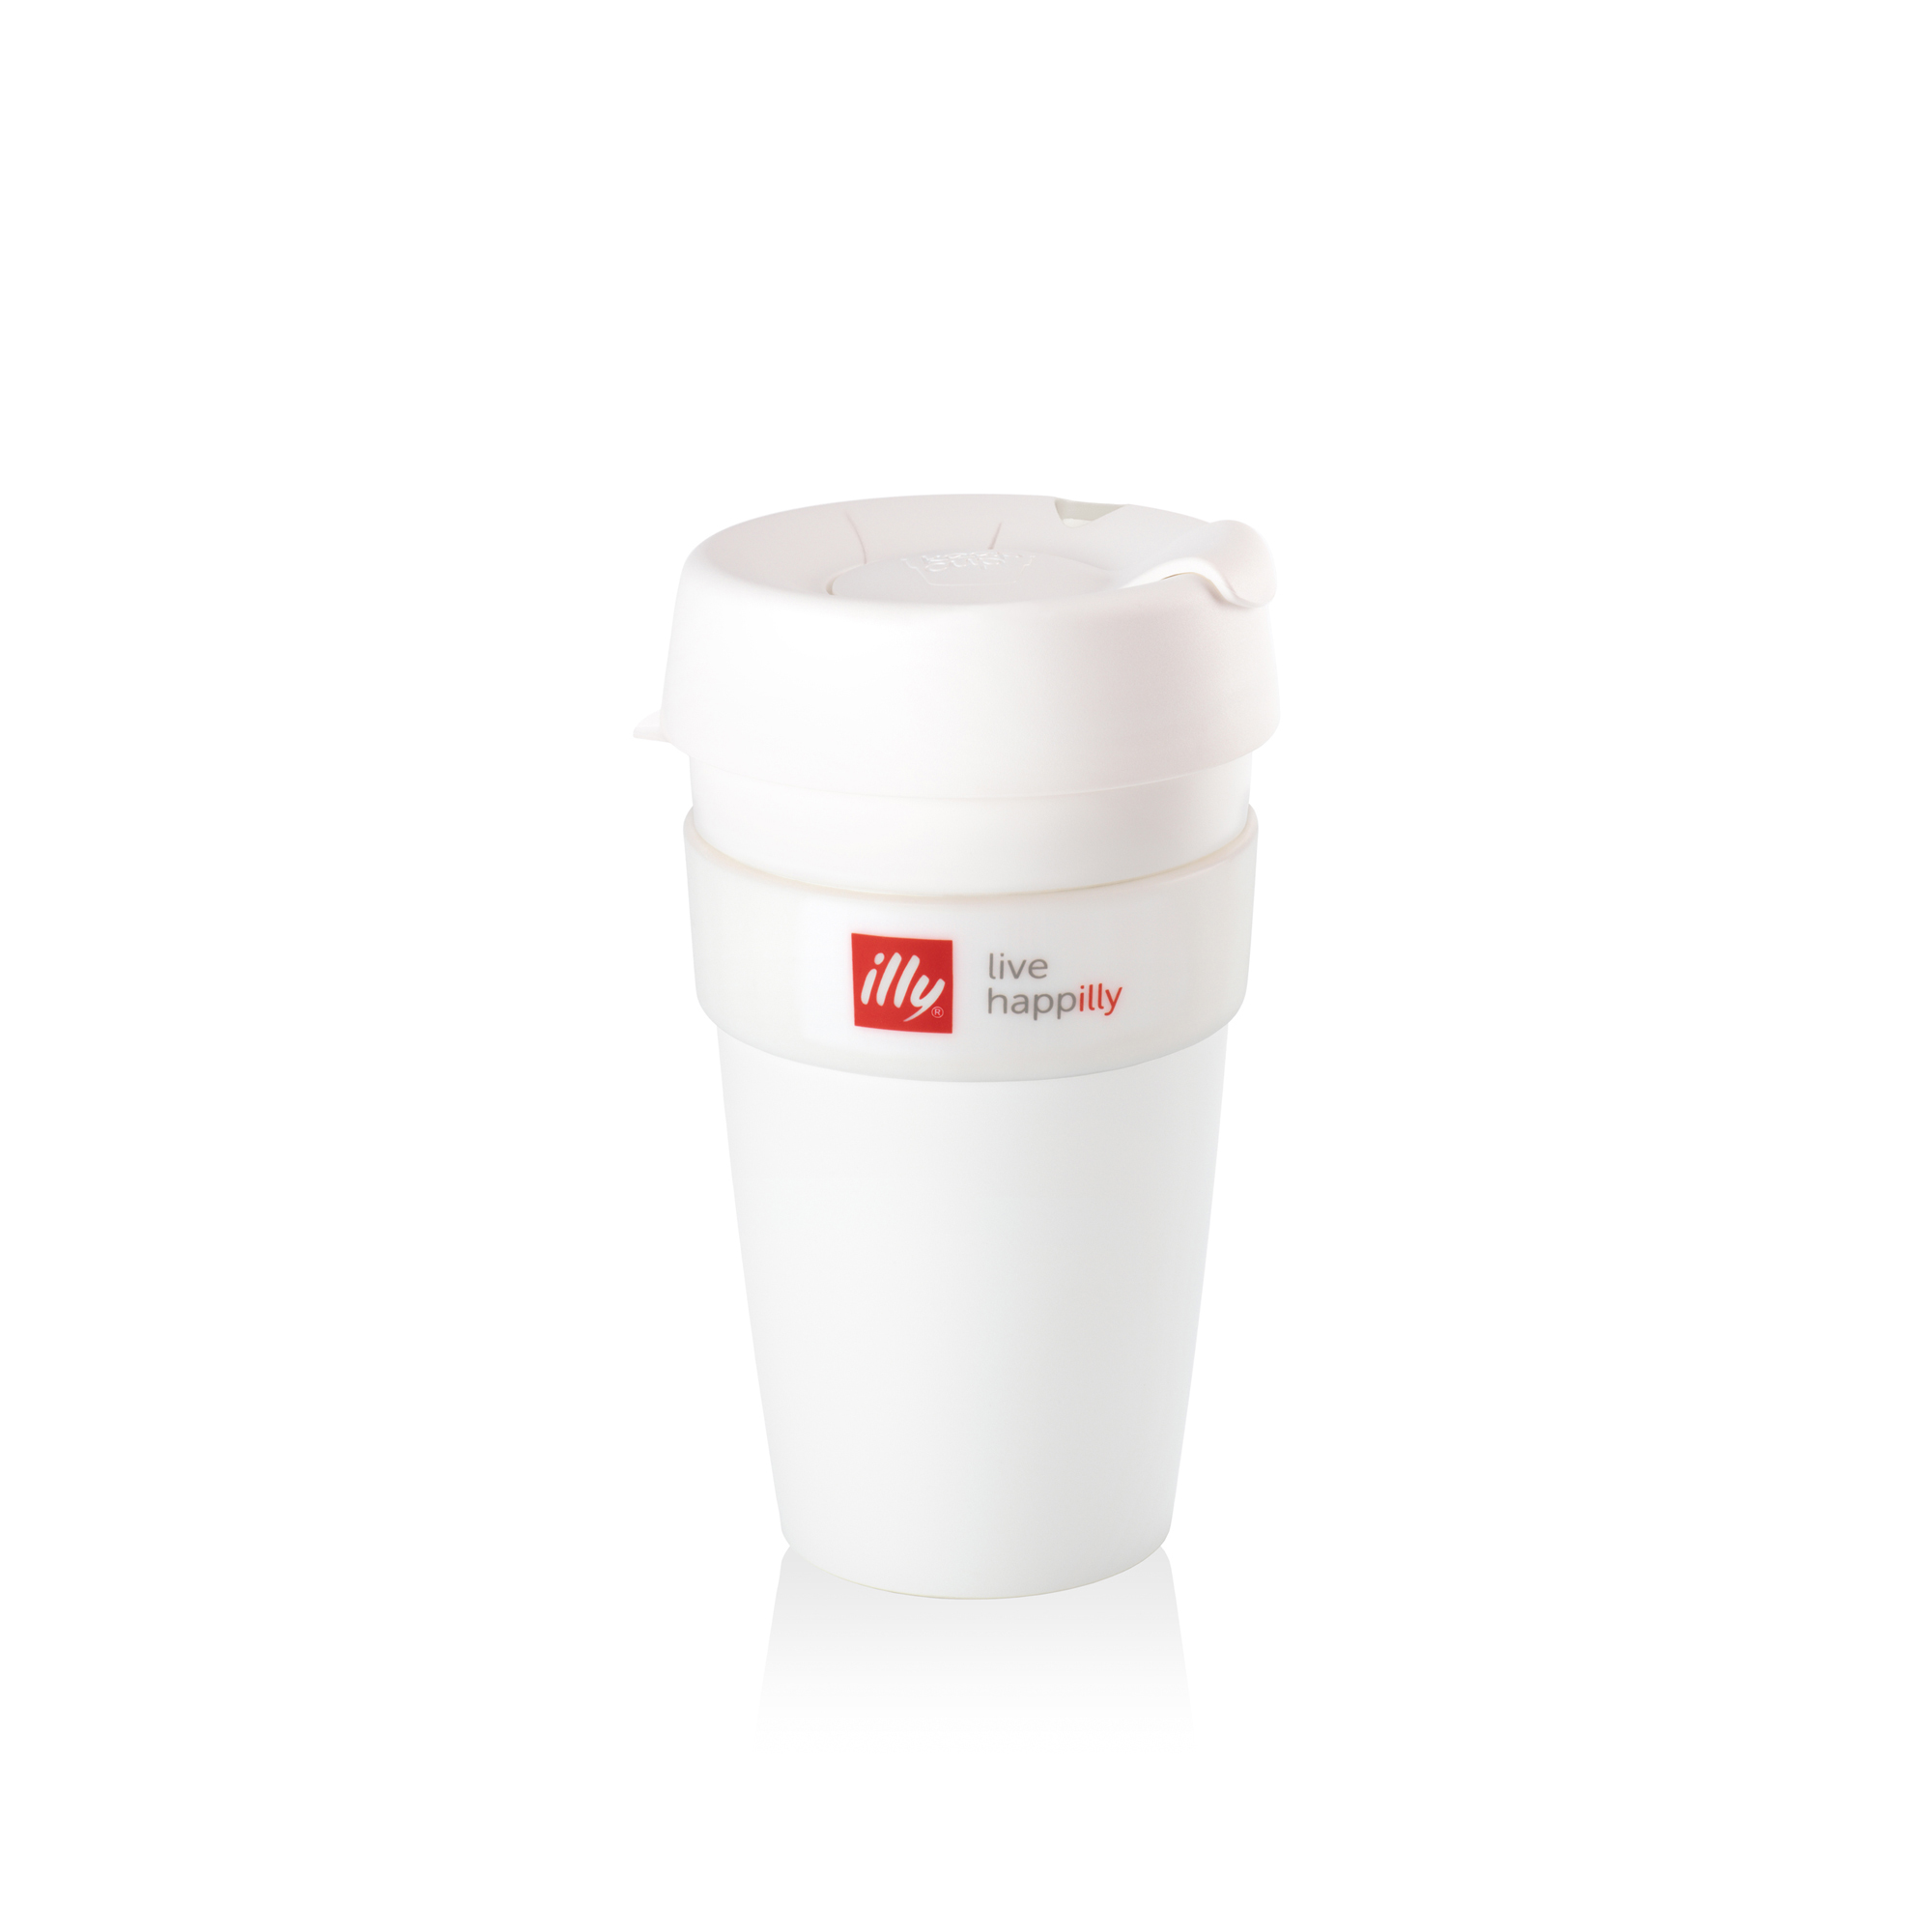 illy Live HAPPilly KeepCup - White